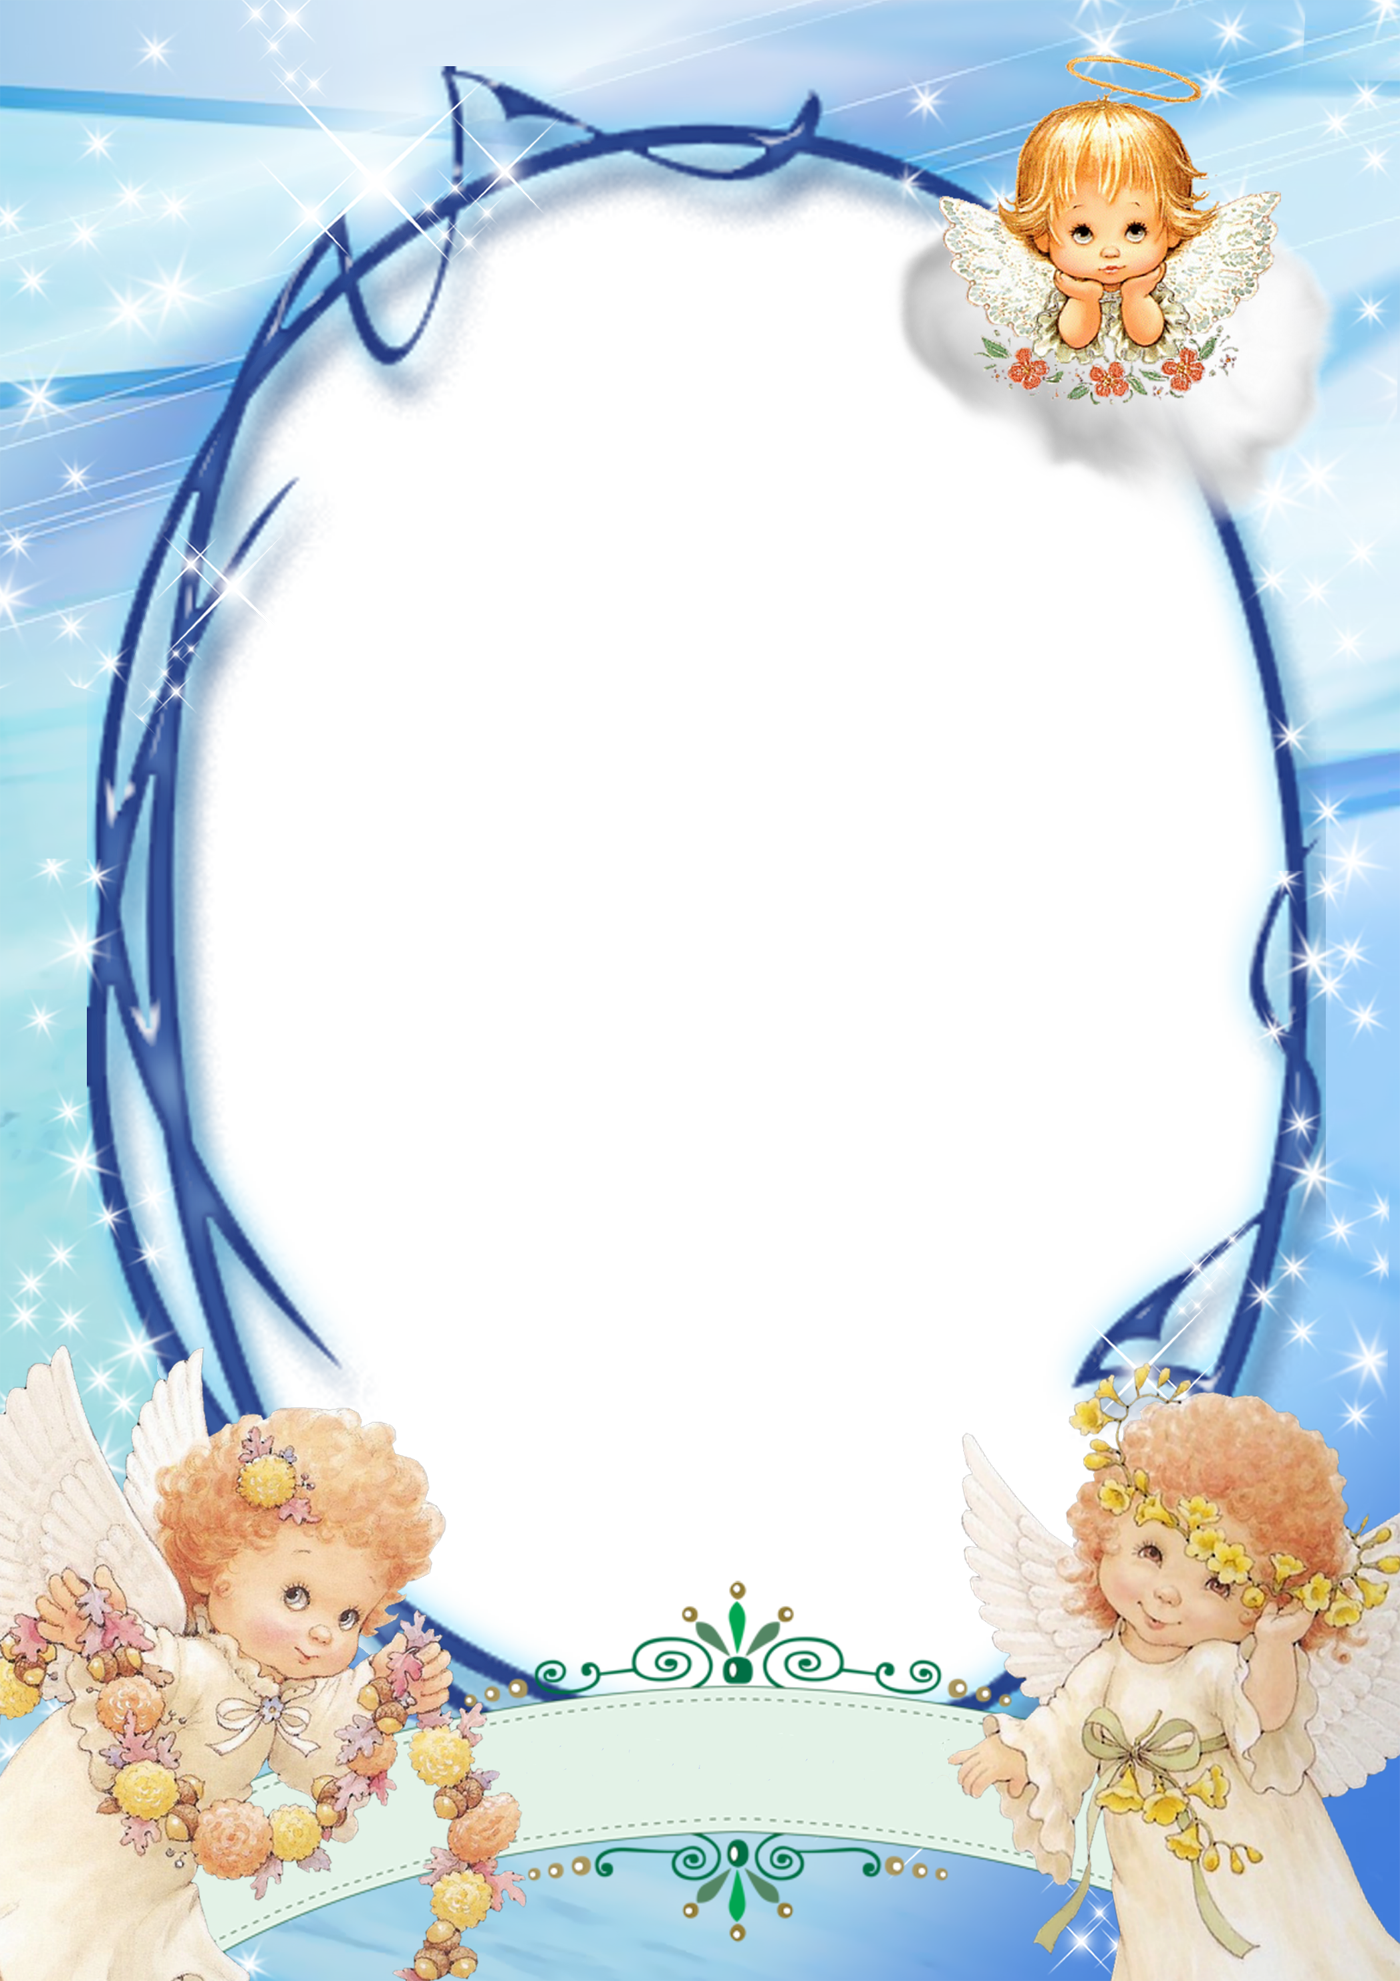 clipart baby frame